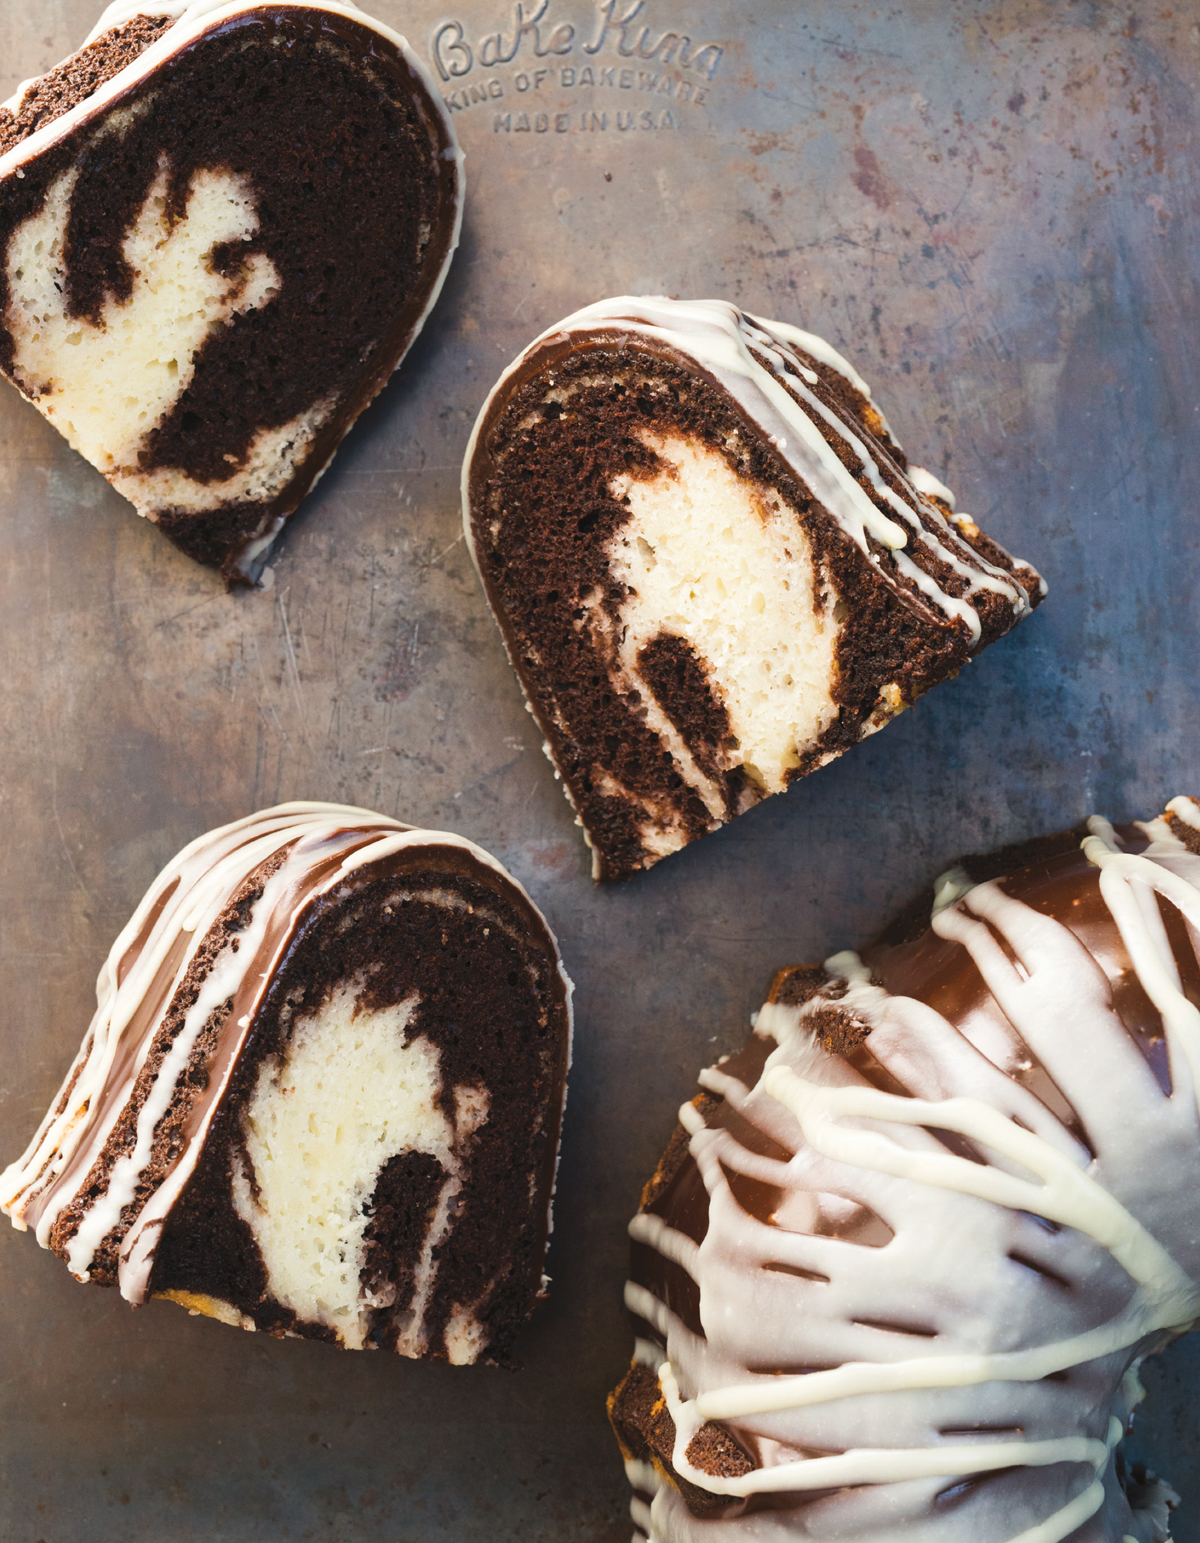 Delicious Bundt Cakes More Than 100 New Recipes for Timeless Favorites - photo 2